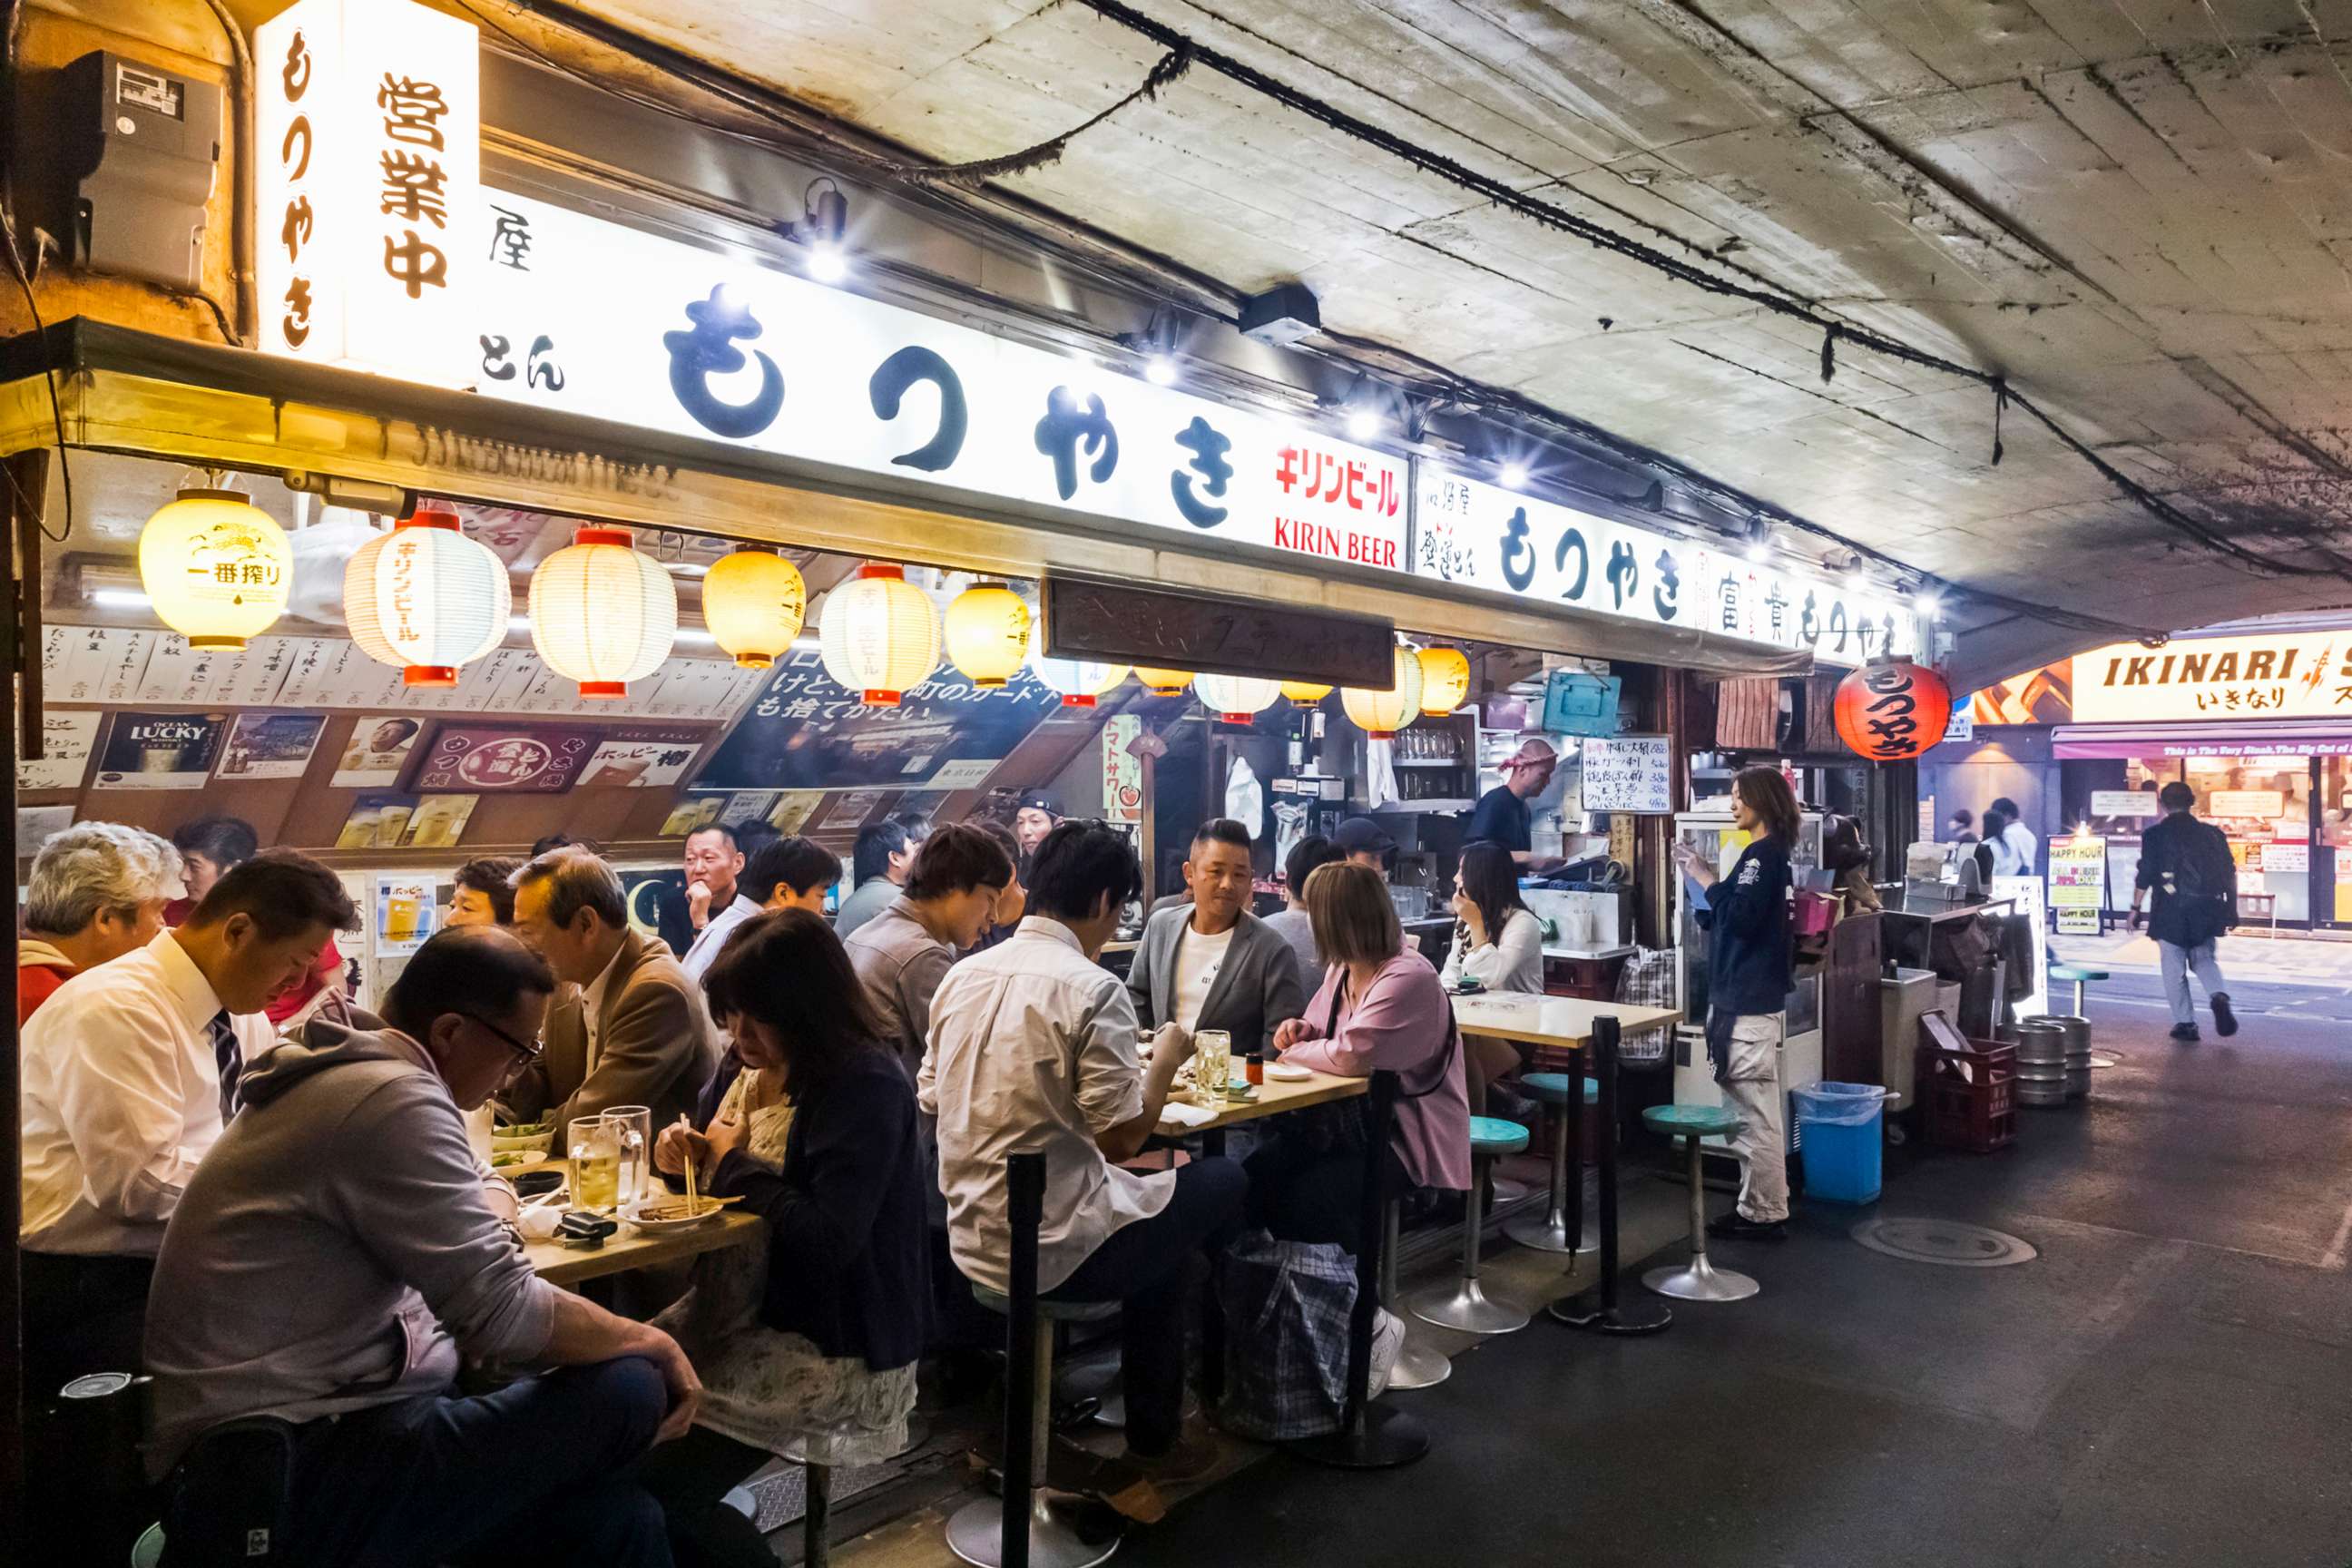 PHOTO: Diners eat at a traditional open air Yakitori Restaurant in Tokyo, Japan.